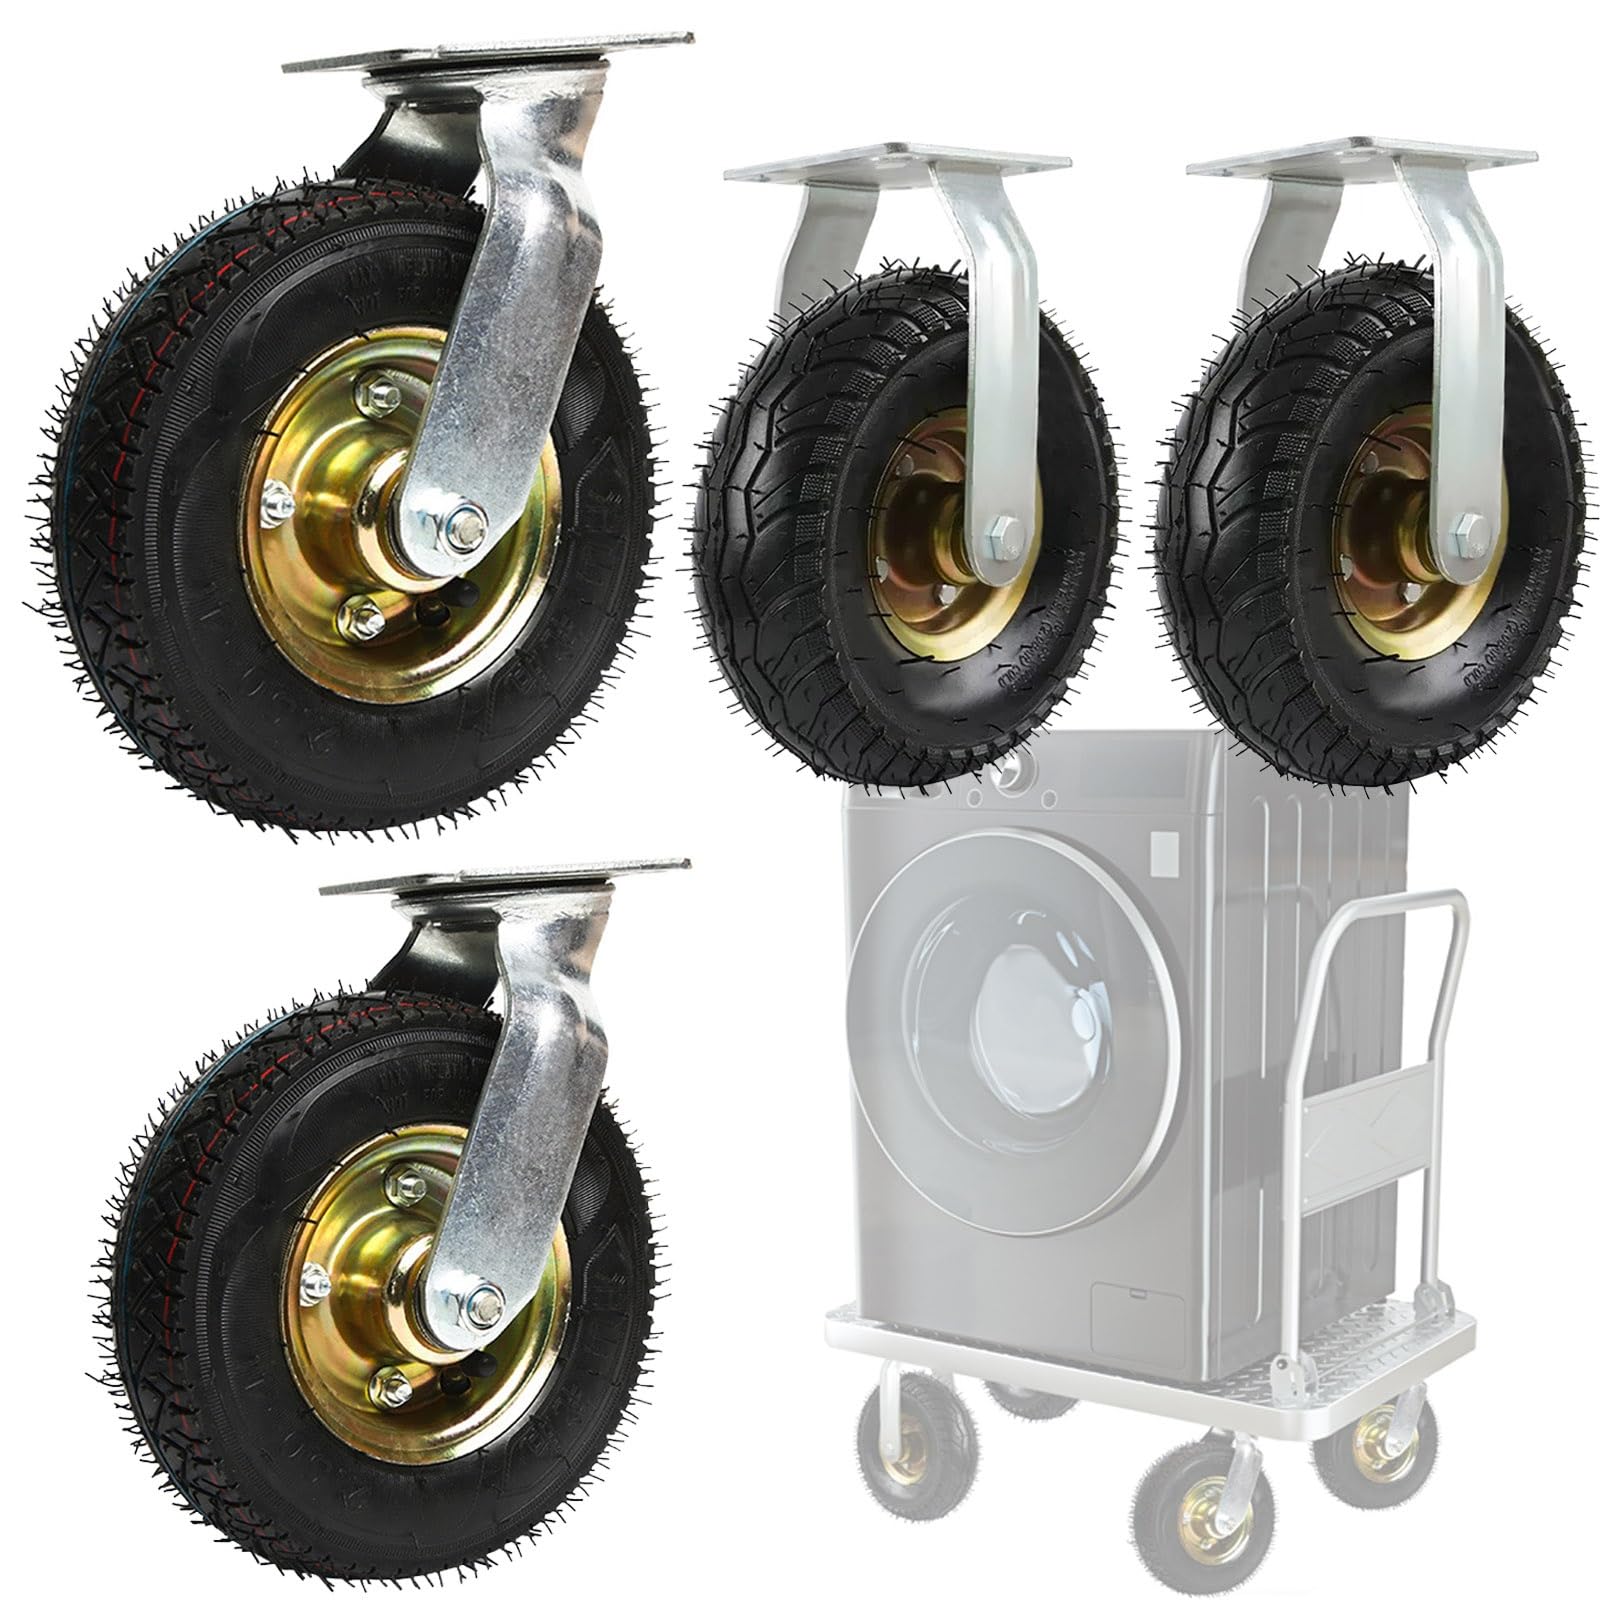 Heavy Duty Replacement Rubber Casters, Swivel Plate Caster, Pneumatic Wheel, 6/8/10In Steel Hub No Floor Marks, for Moving Silent Furniture/Table/Trolley/Workbench